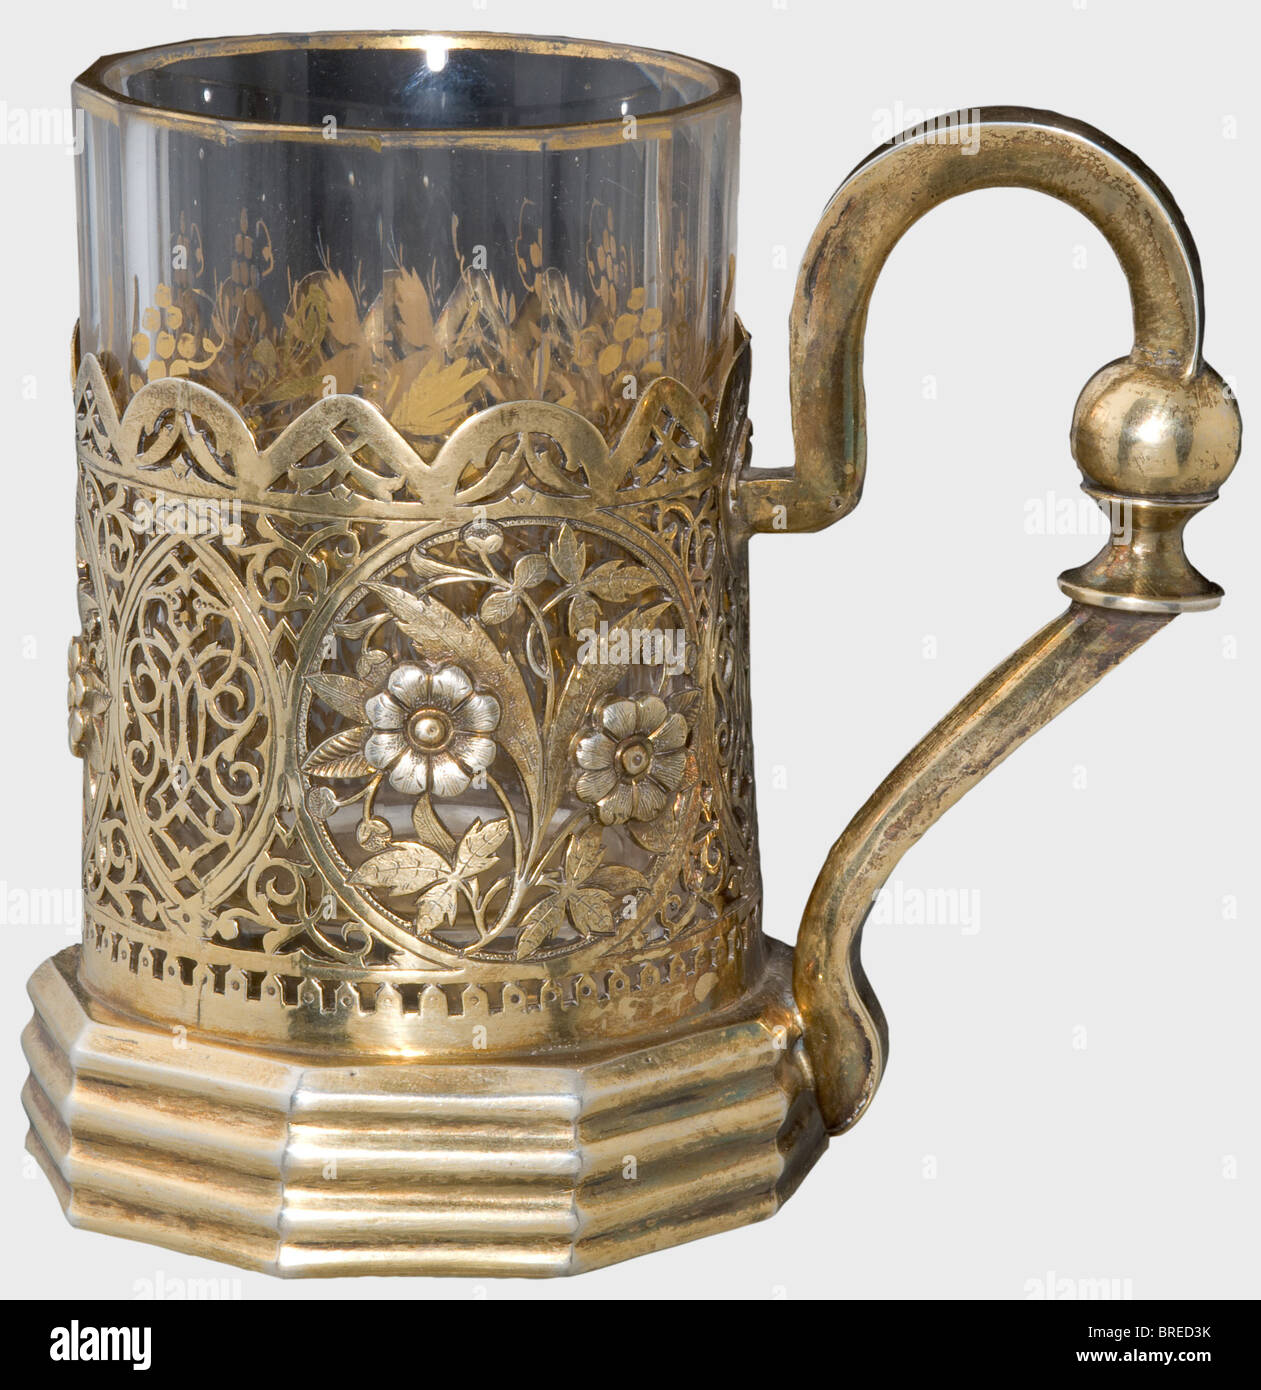 A gilt silver tea glass holder, N. Alexeev, Moscow, 1895 Silver, completely gilt, openwork floral designs. Cyrillic master's mark, 'NA', Moscow hallmark for '84', the Cyrillic inspecting master's mark, 'AS' and the year '1895' are on the bottom. Height 11.4 cm. Weight 192 g. Faceted tea glass with golden floral decoration. Provenance: Grand Duchess Vera Konstantinovna Romanova (1854 - 1912). historic, historical, 1910s, 20th century, 19th century, fine arts, art, art object, art objects, artful, precious, collectible, collector's item, collectibles, collector's, Stock Photo